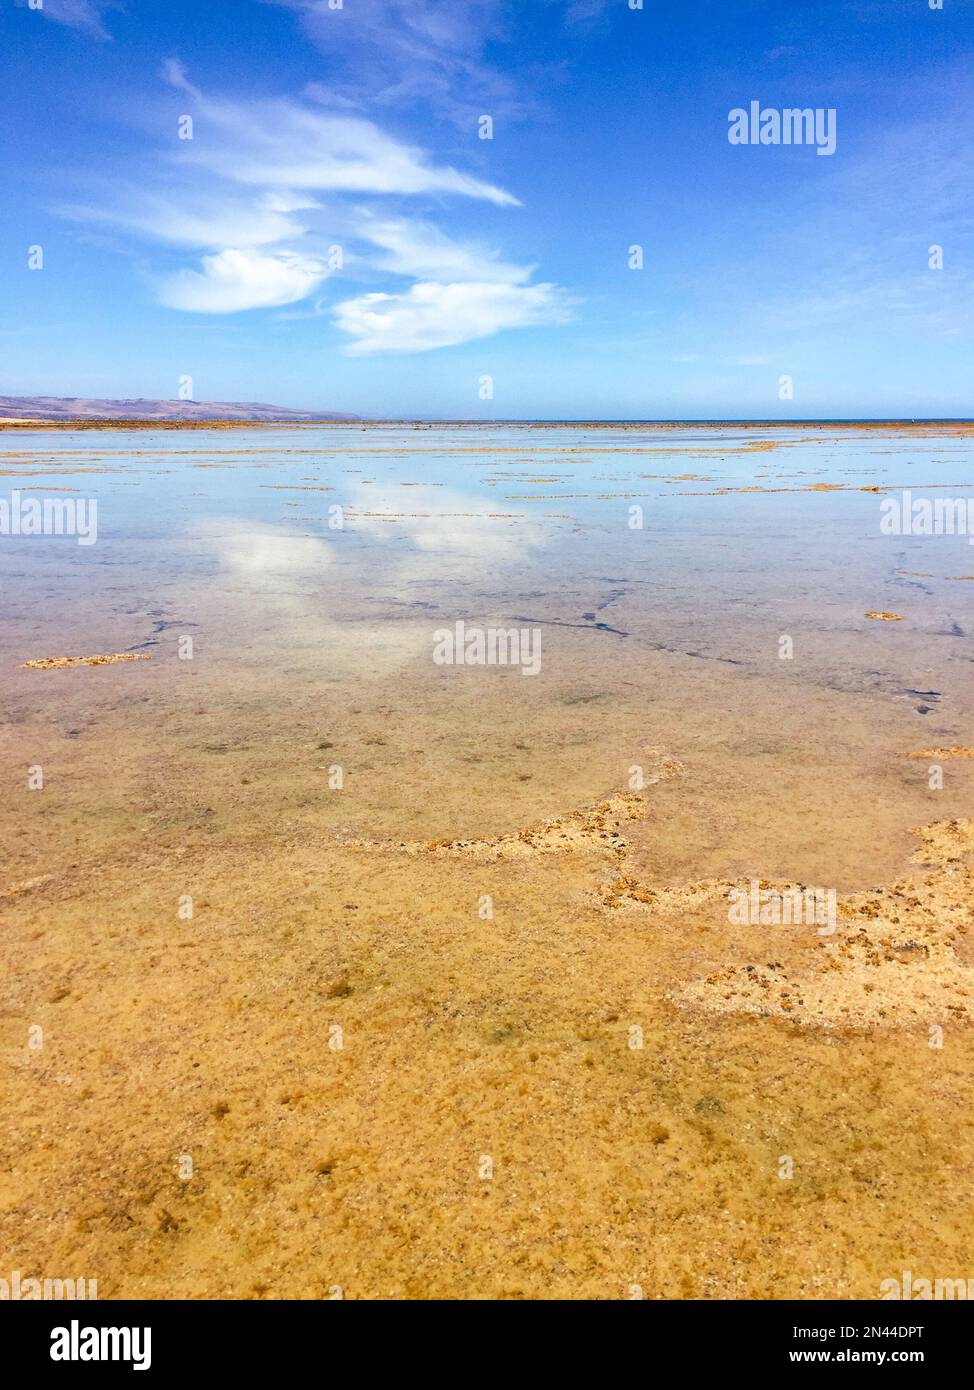 Stunning blue sky and cloud reflections along the coastline of the beach with the reef underlying the crystal clear water Stock Photo